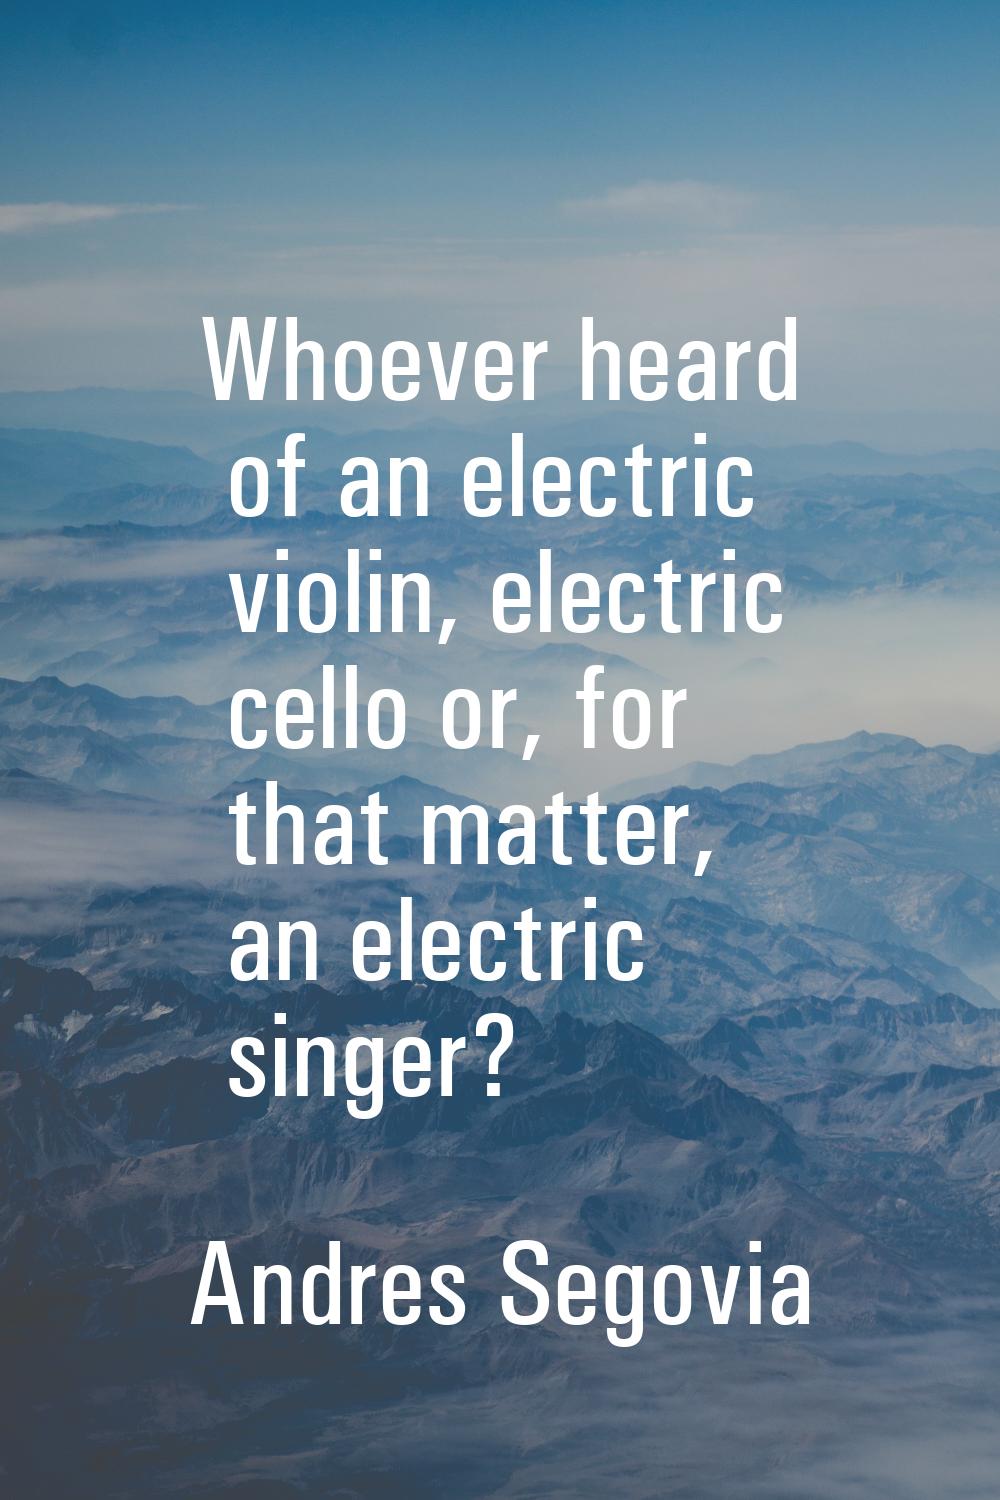 Whoever heard of an electric violin, electric cello or, for that matter, an electric singer?